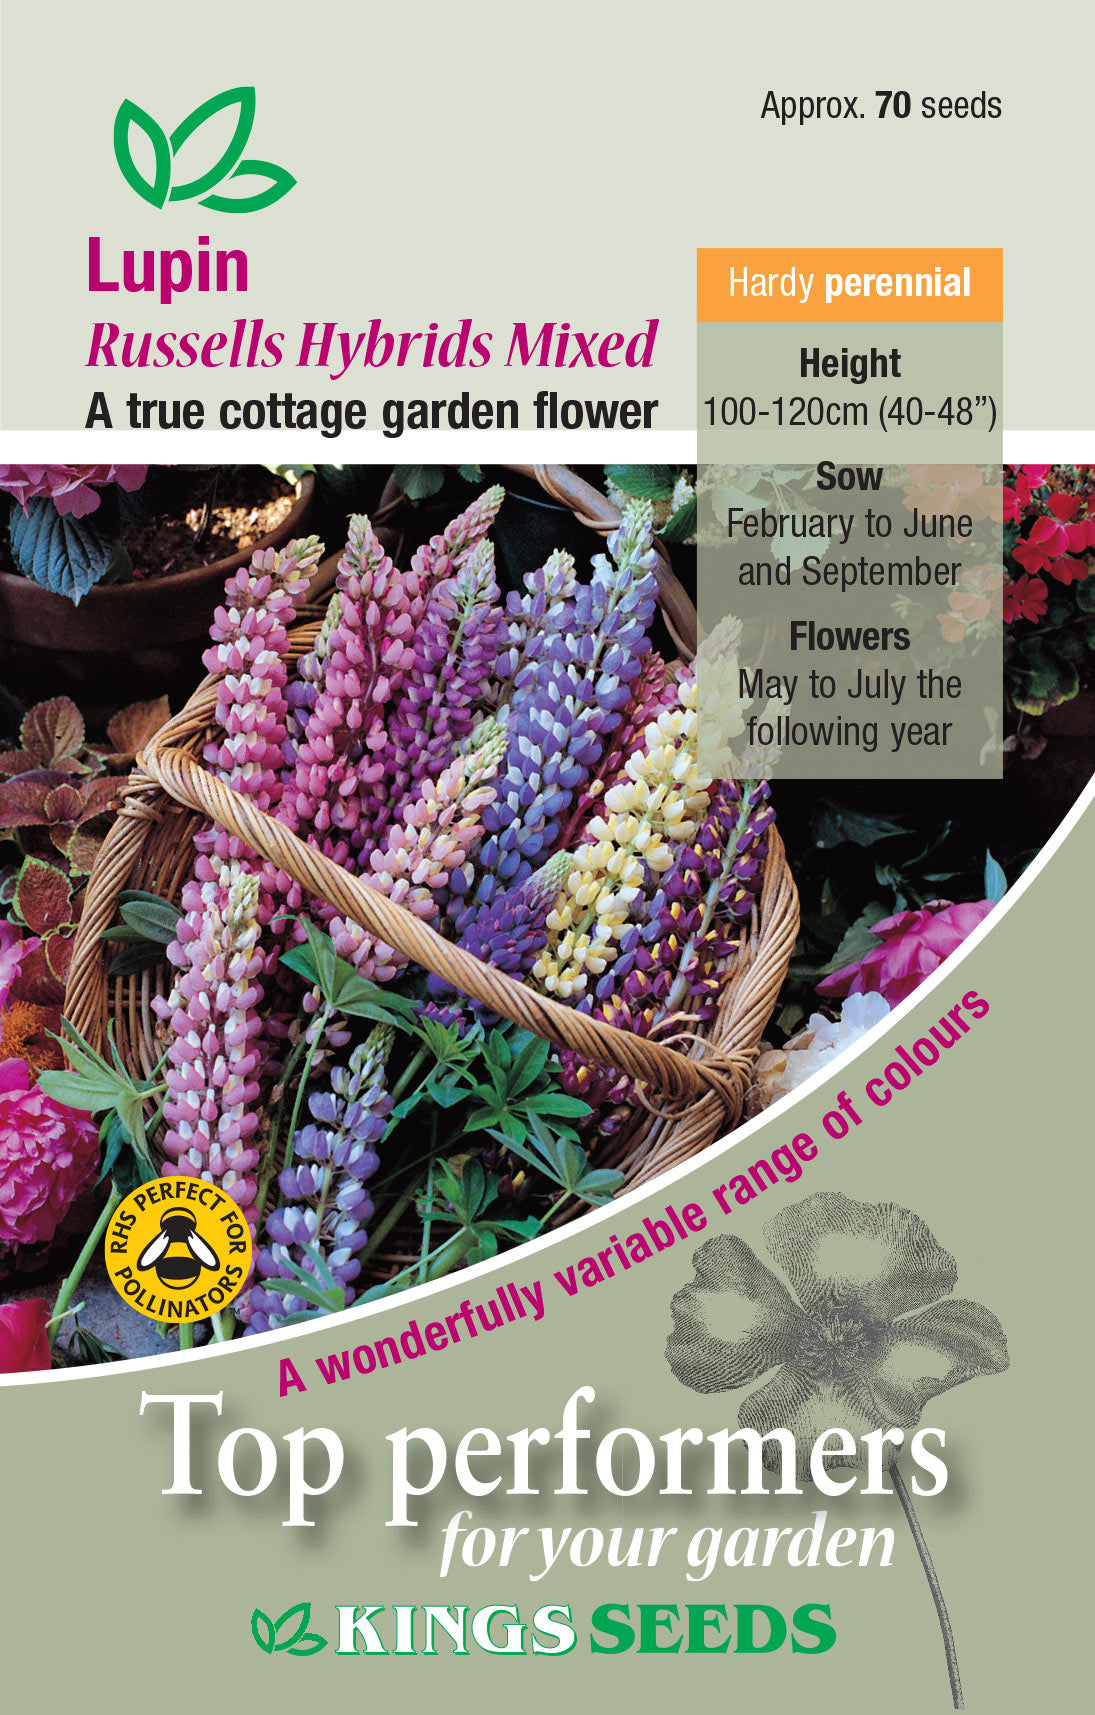 Kings Seeds Lupin Russell Hybrids Mixed 70 Seeds